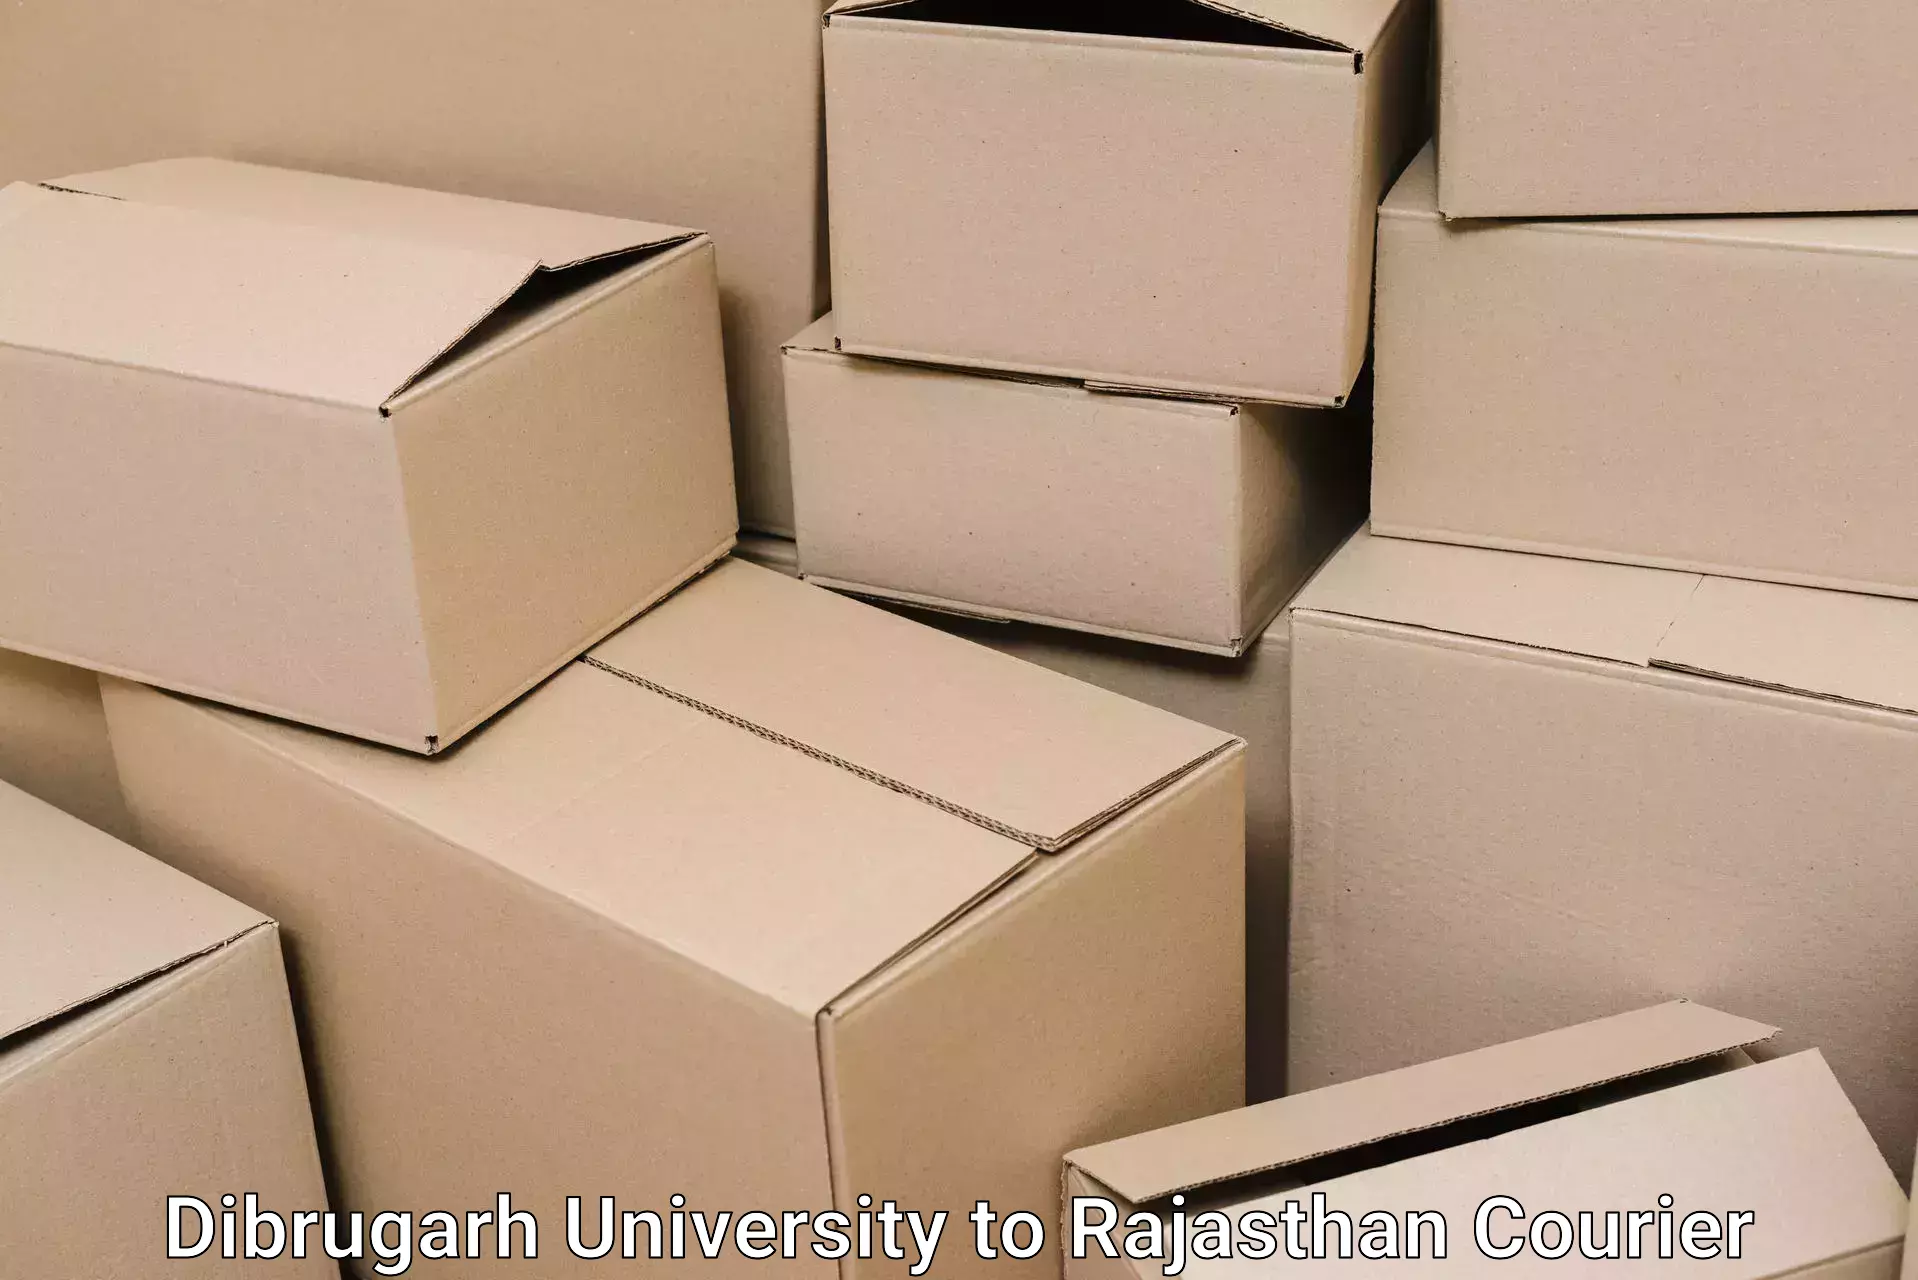 Specialized moving company Dibrugarh University to Sikar